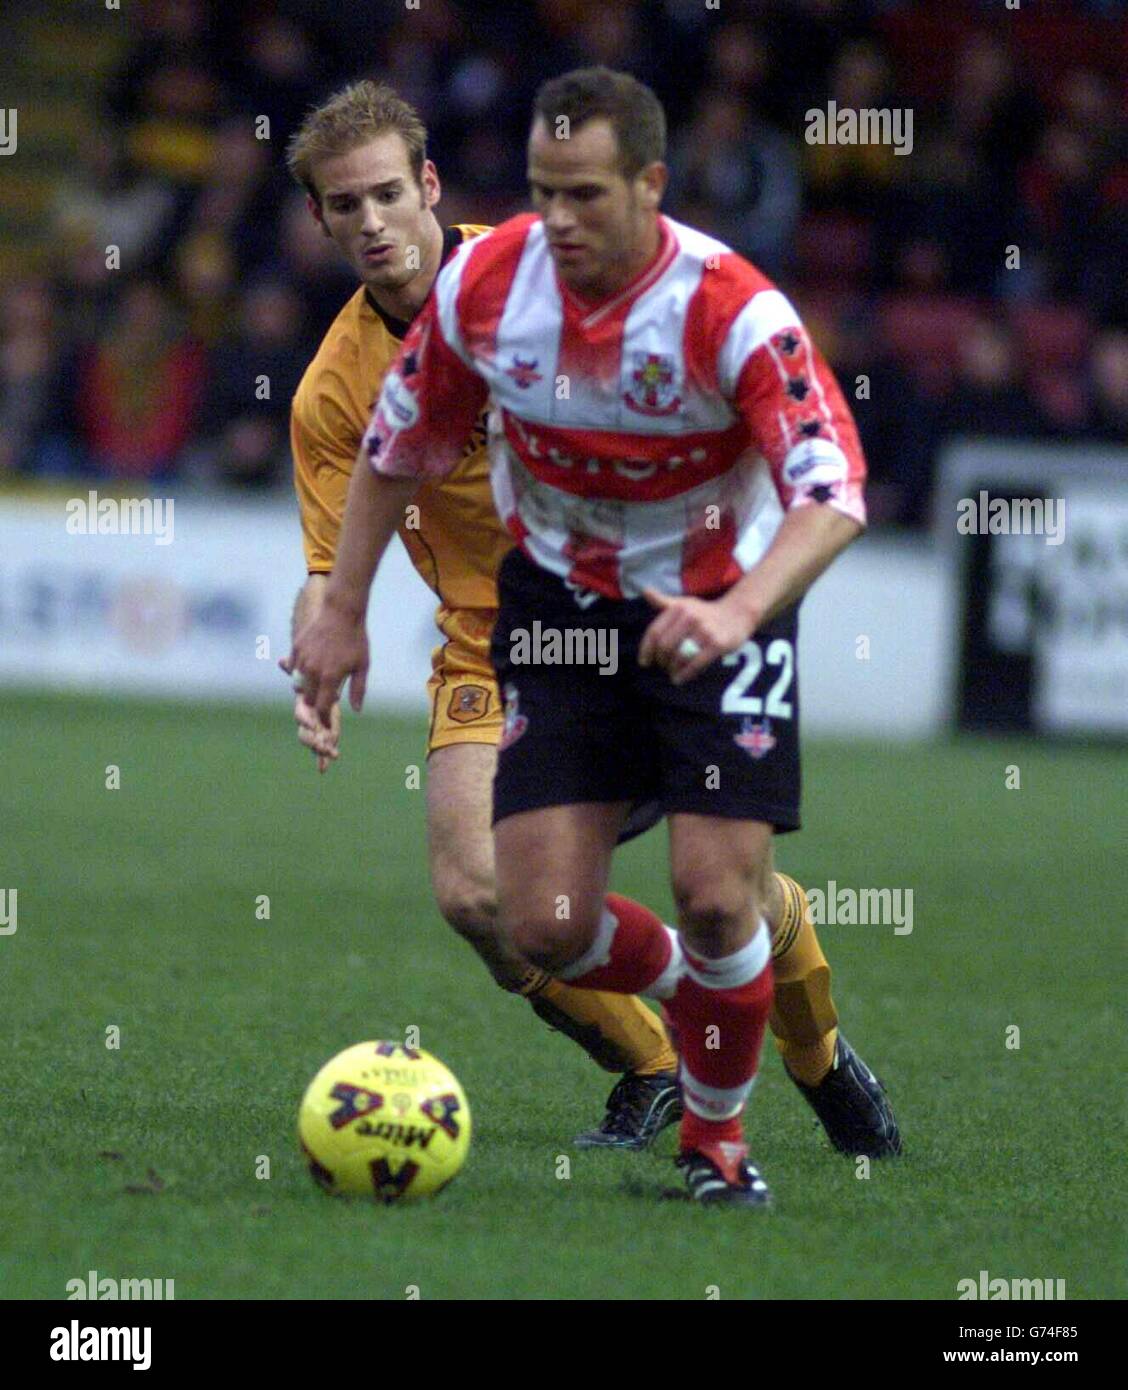 Hull City's Lawrie Dudfield gives chase to Mark Bailey (right) of Lincoln City during the Nationwide Division Three match at Sincil Bank, Lincoln. NO UNOFFICIAL CLUB WEBSITE USE. Stock Photo